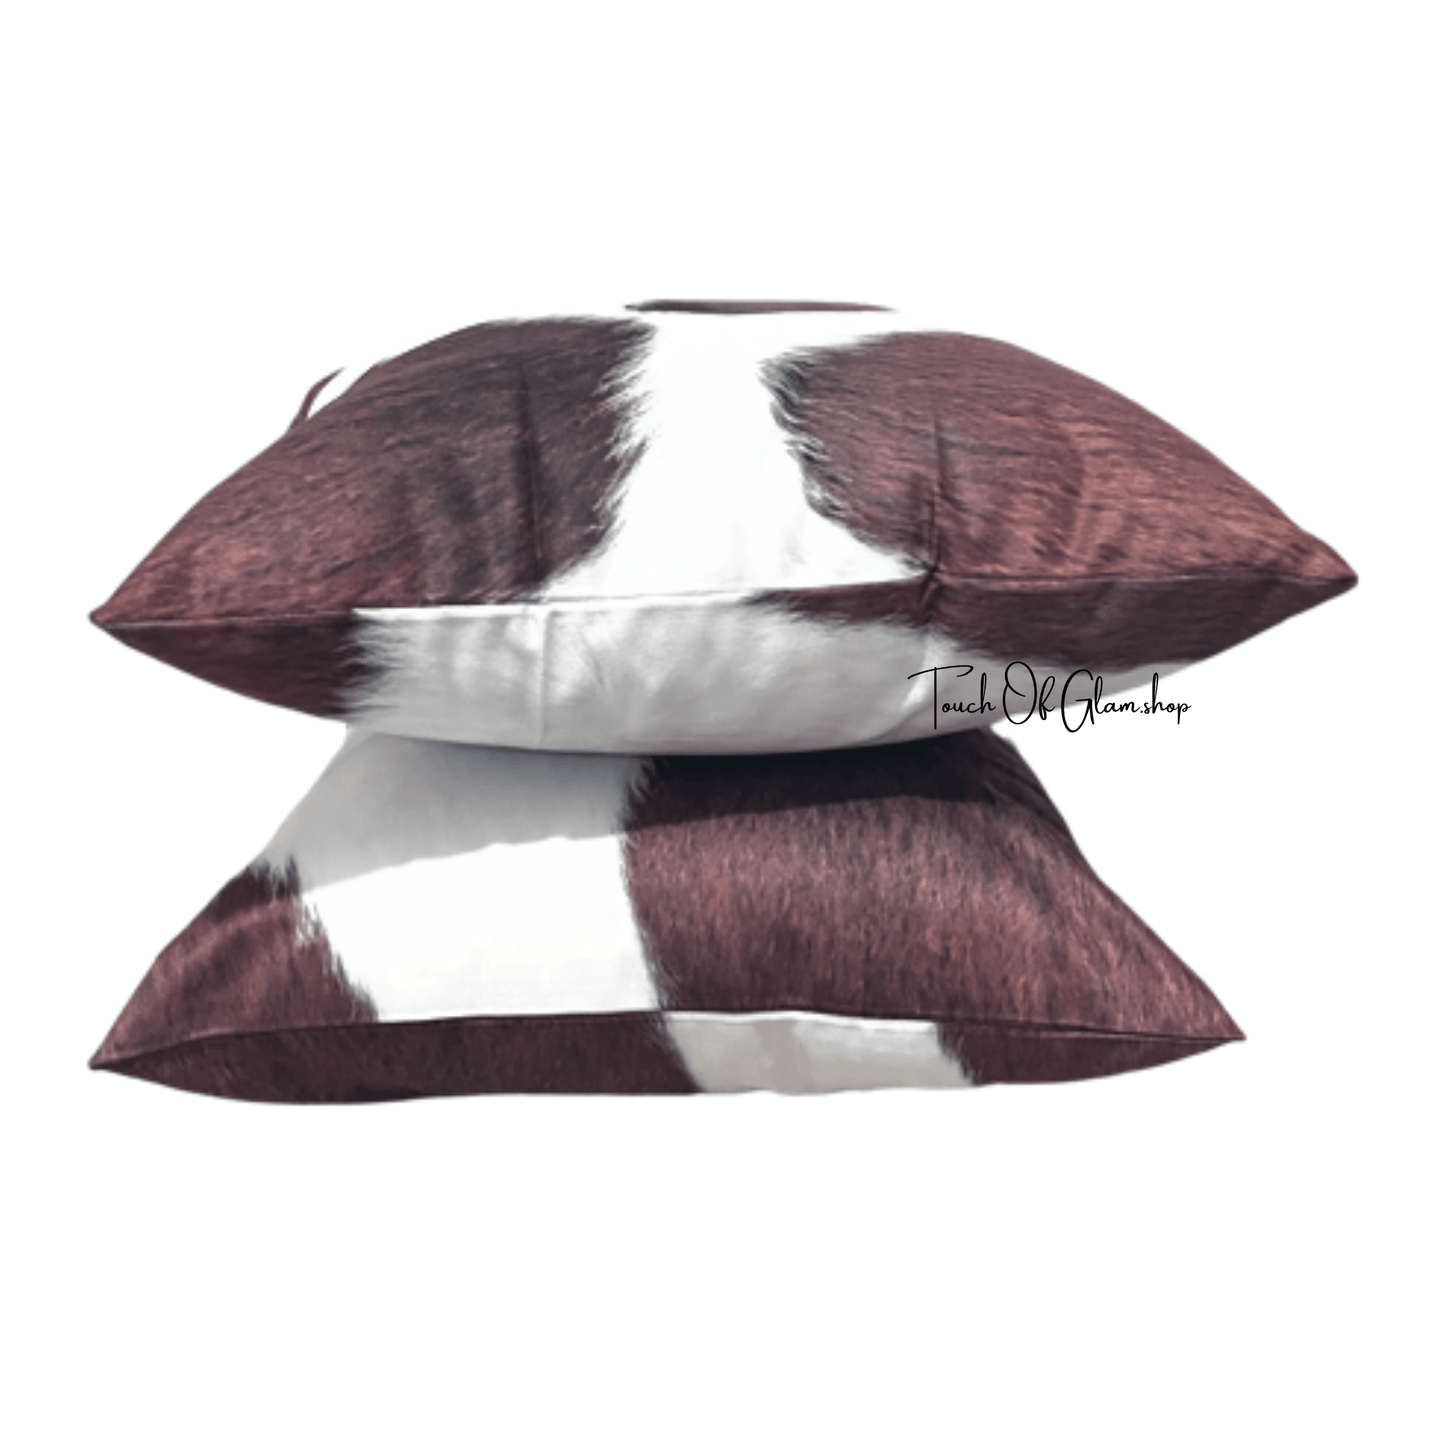 Wholesale Throw Pillow Covers, Faux Cowhide, Brown & White - Circle marking